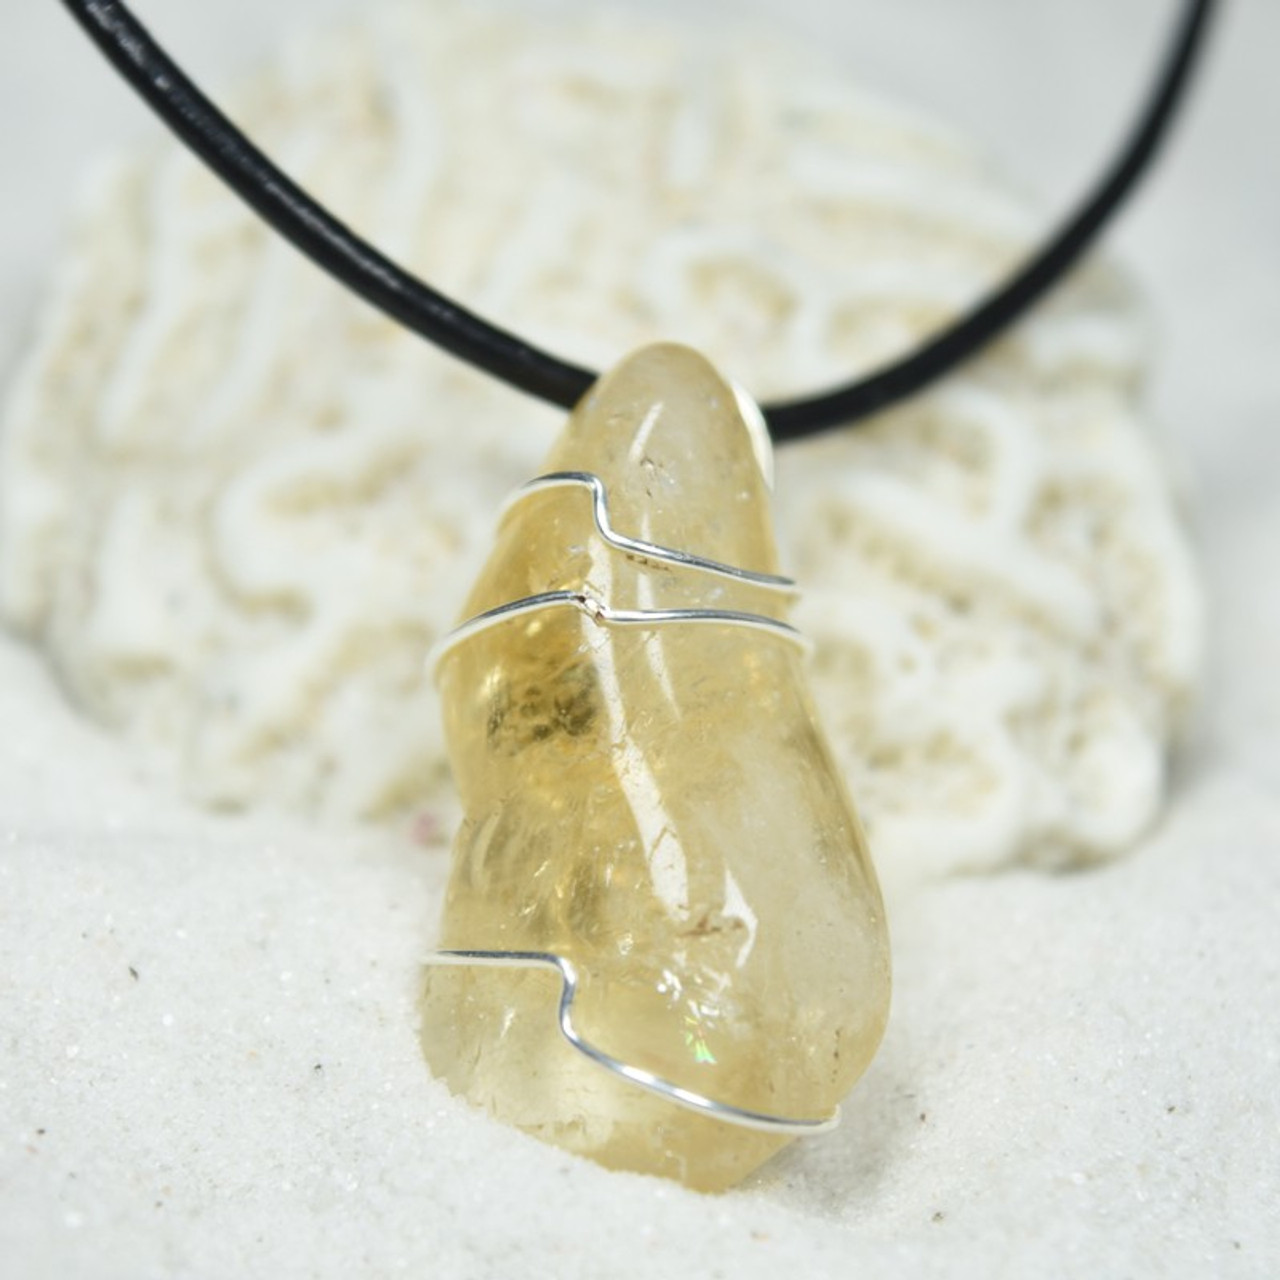 Custom Tumbled Citrine Stone Wire Wrapped Necklace - Choose Sterling Silver Chain or Leather Cord - Quantity of 1